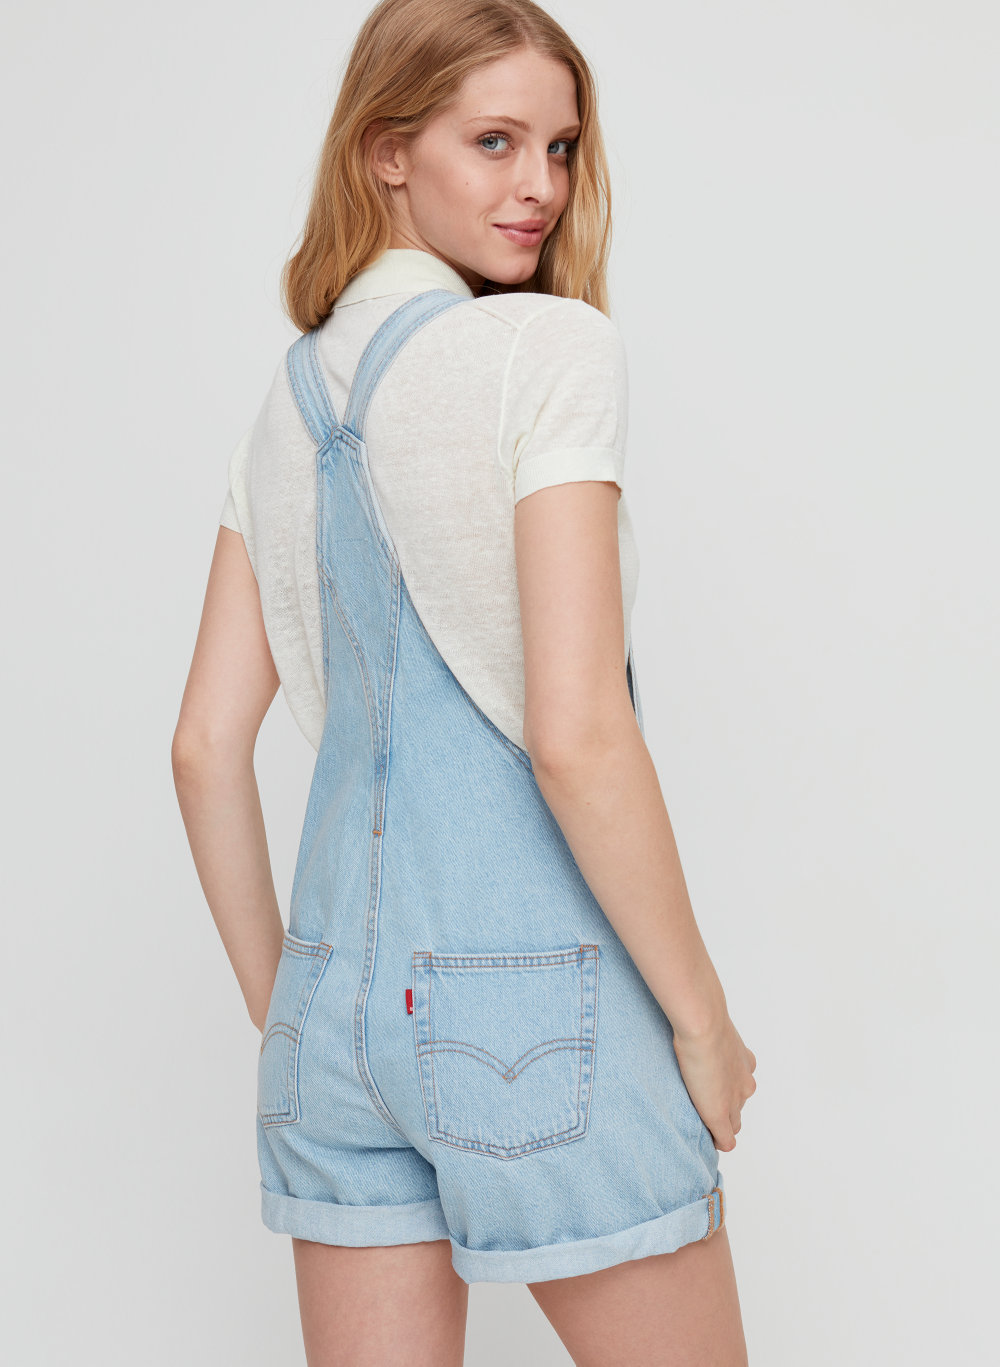 levis overall shorts